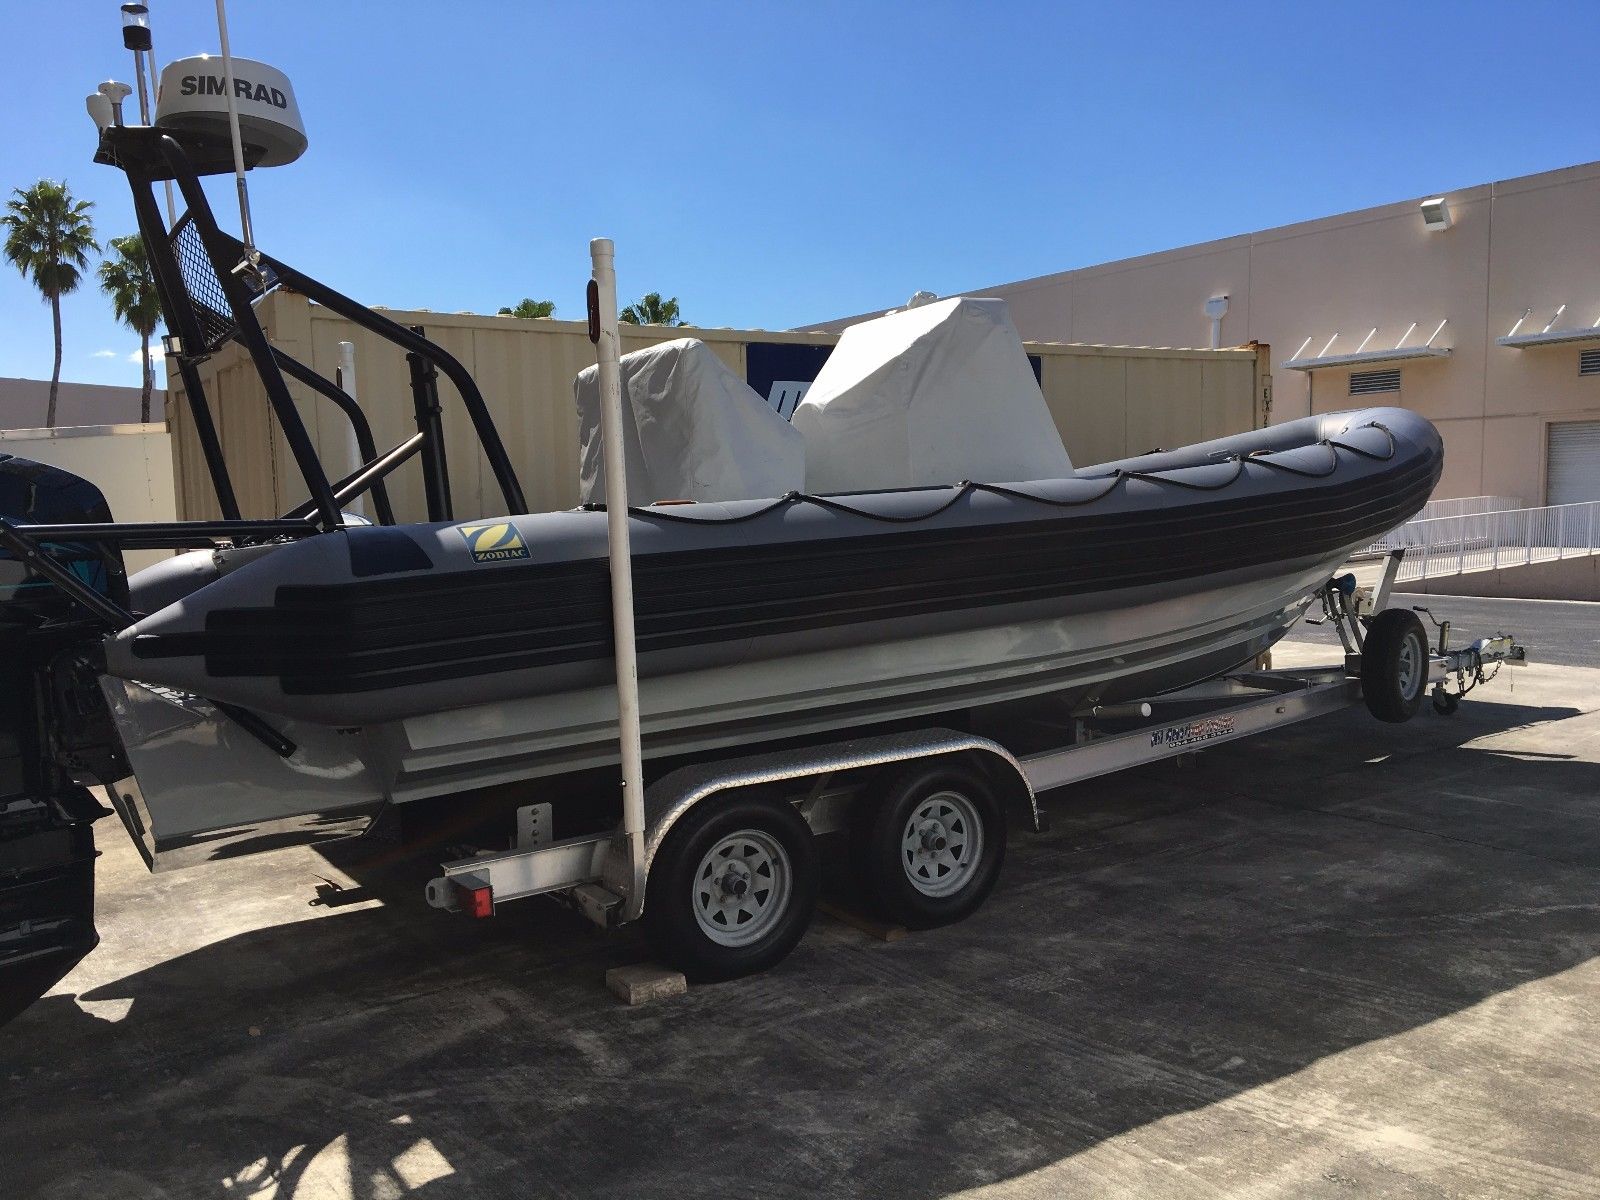 Zodiac Hurricane H733 1994 for sale for $76,900 - Boats-from-USA.com